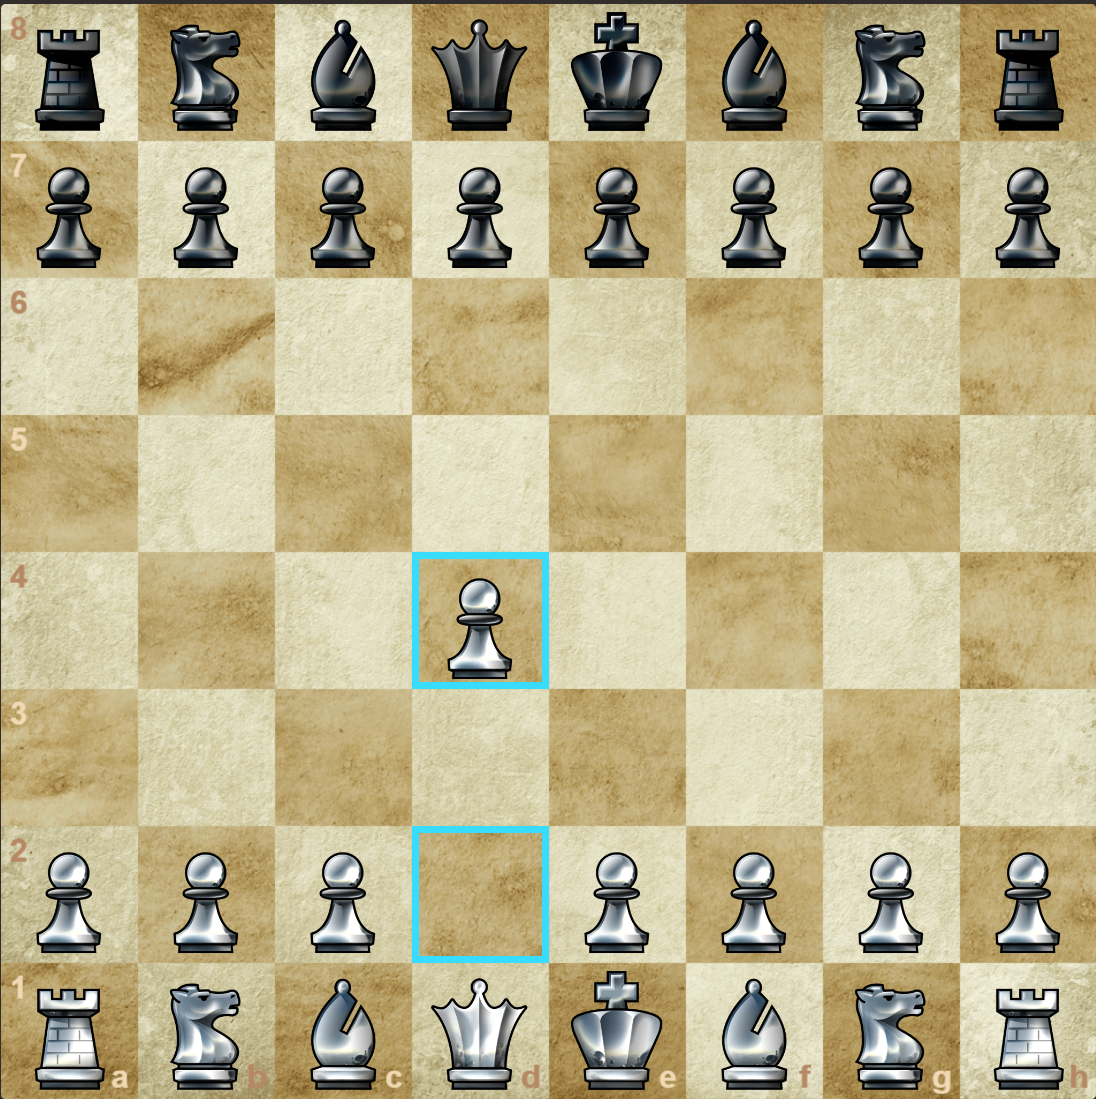 Anand sacrificed both bishops then knights to attack king side